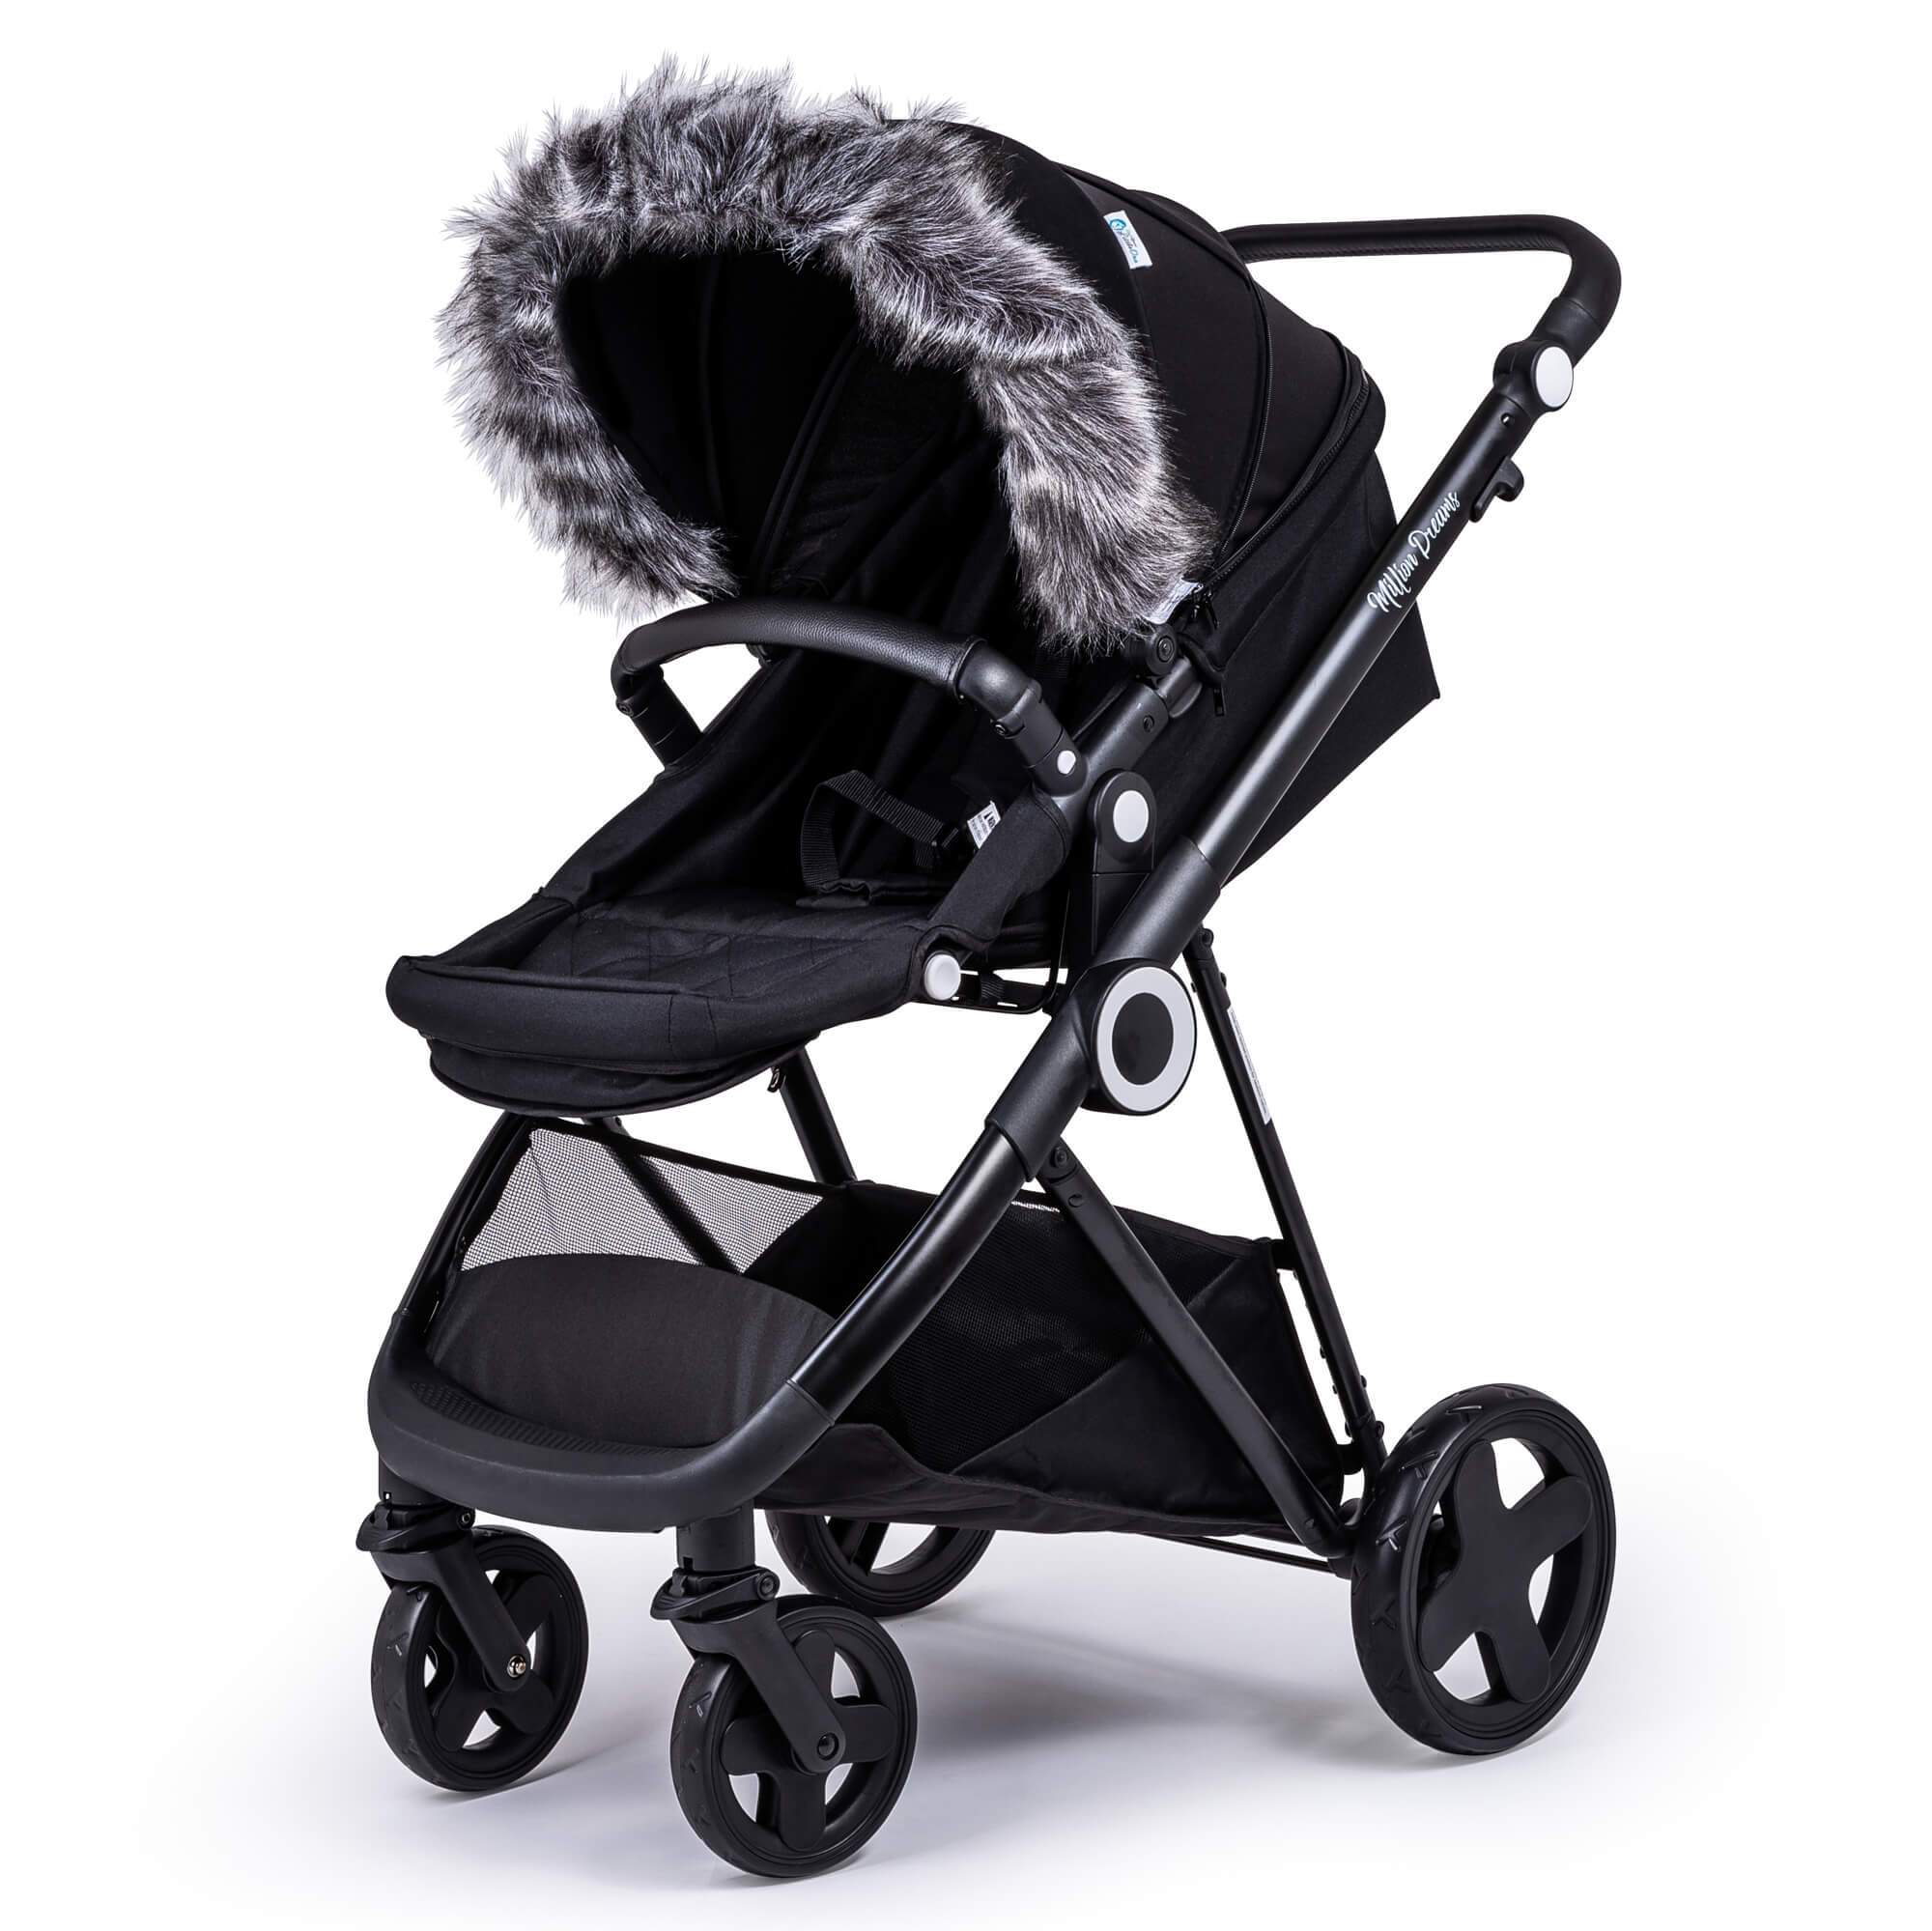 Pram Fur Hood Trim Attachment for Pushchair Compatible with Petite - Dark Grey / Fits All Models | For Your Little One